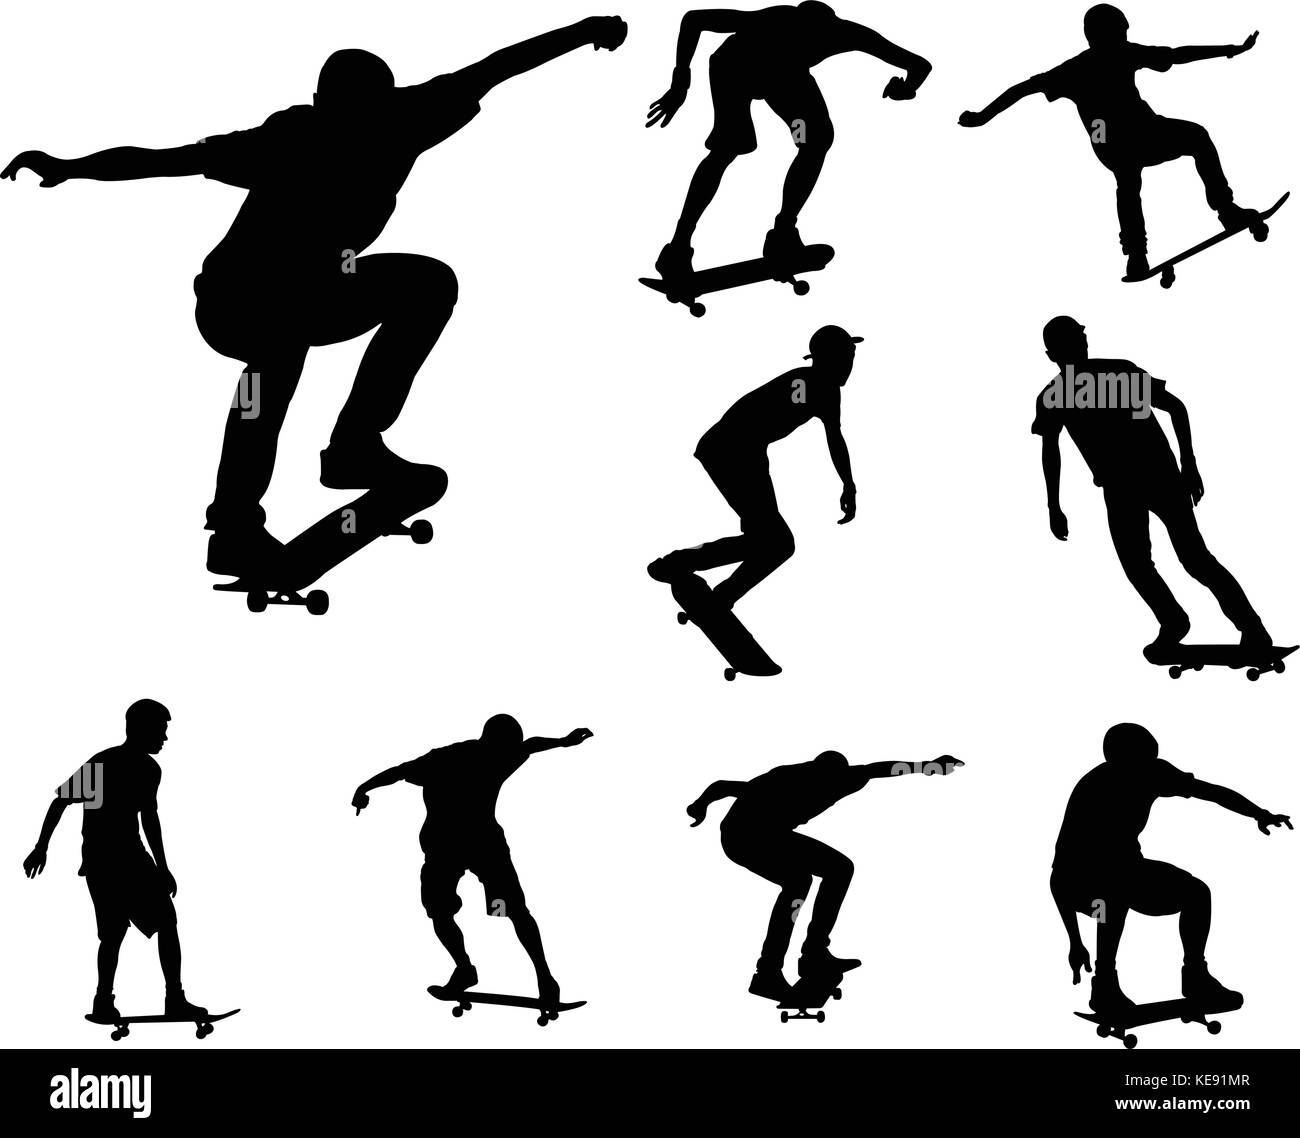 skateboarders silhouettes collection - vector Stock Vector